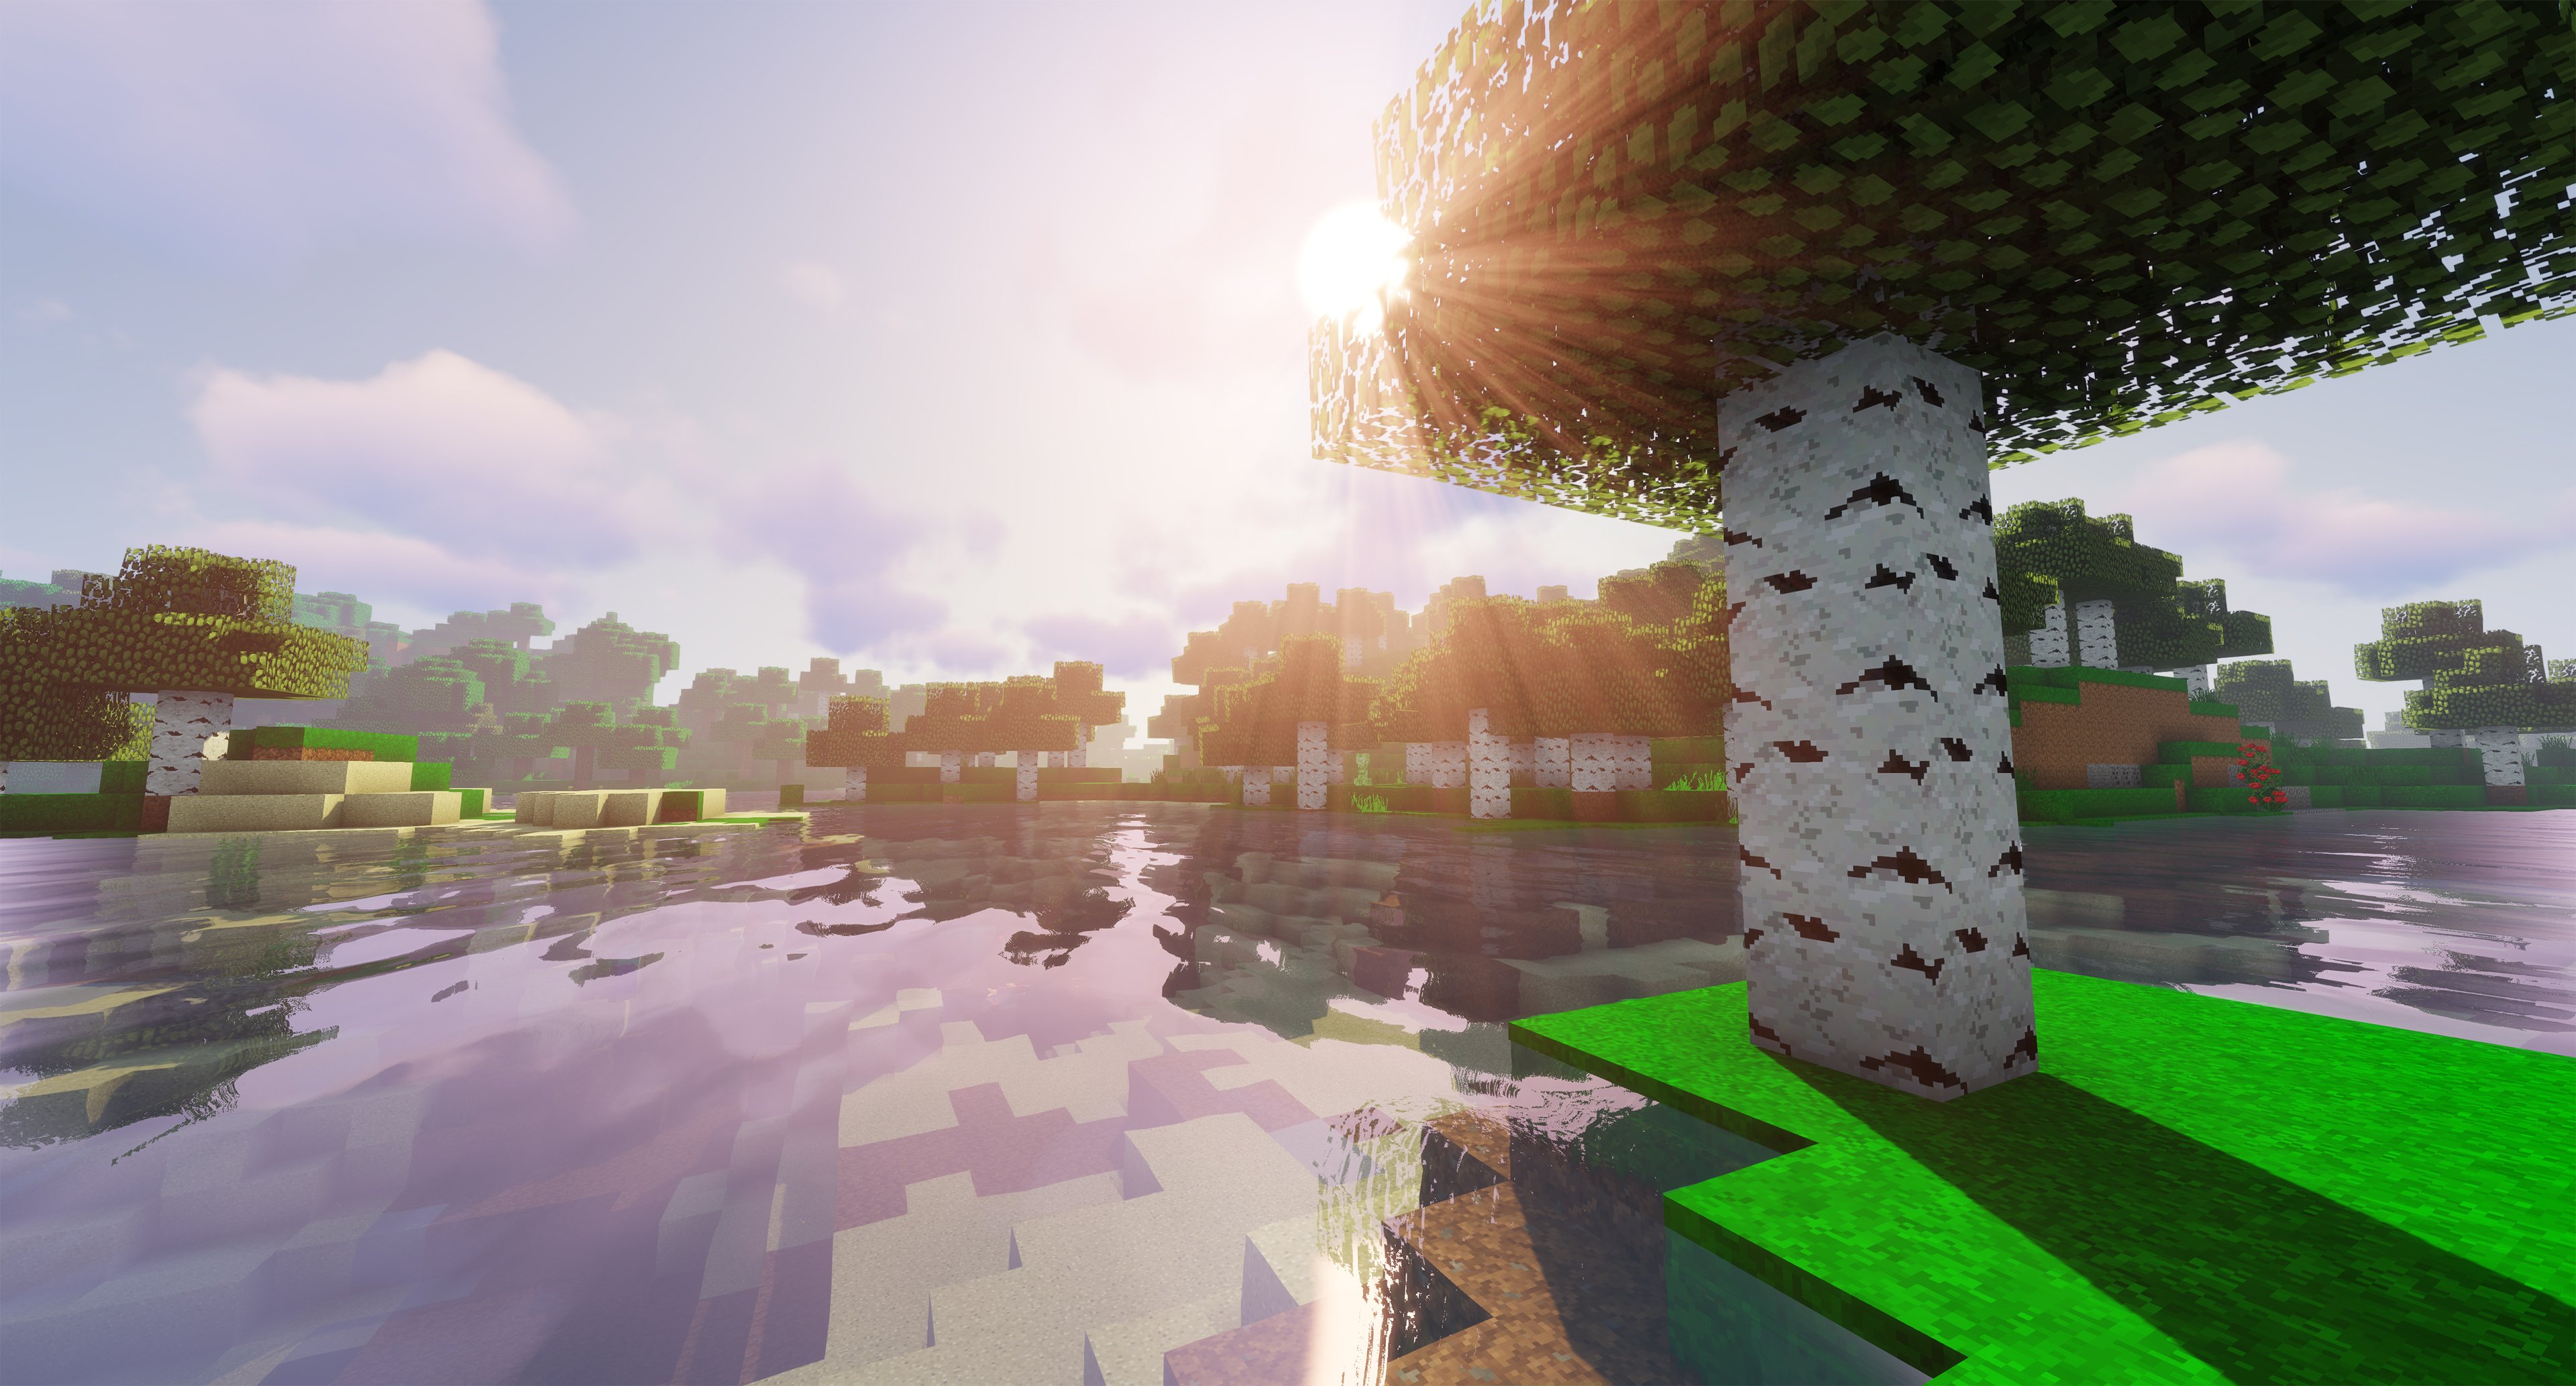 Some random terrain with shaders enabled